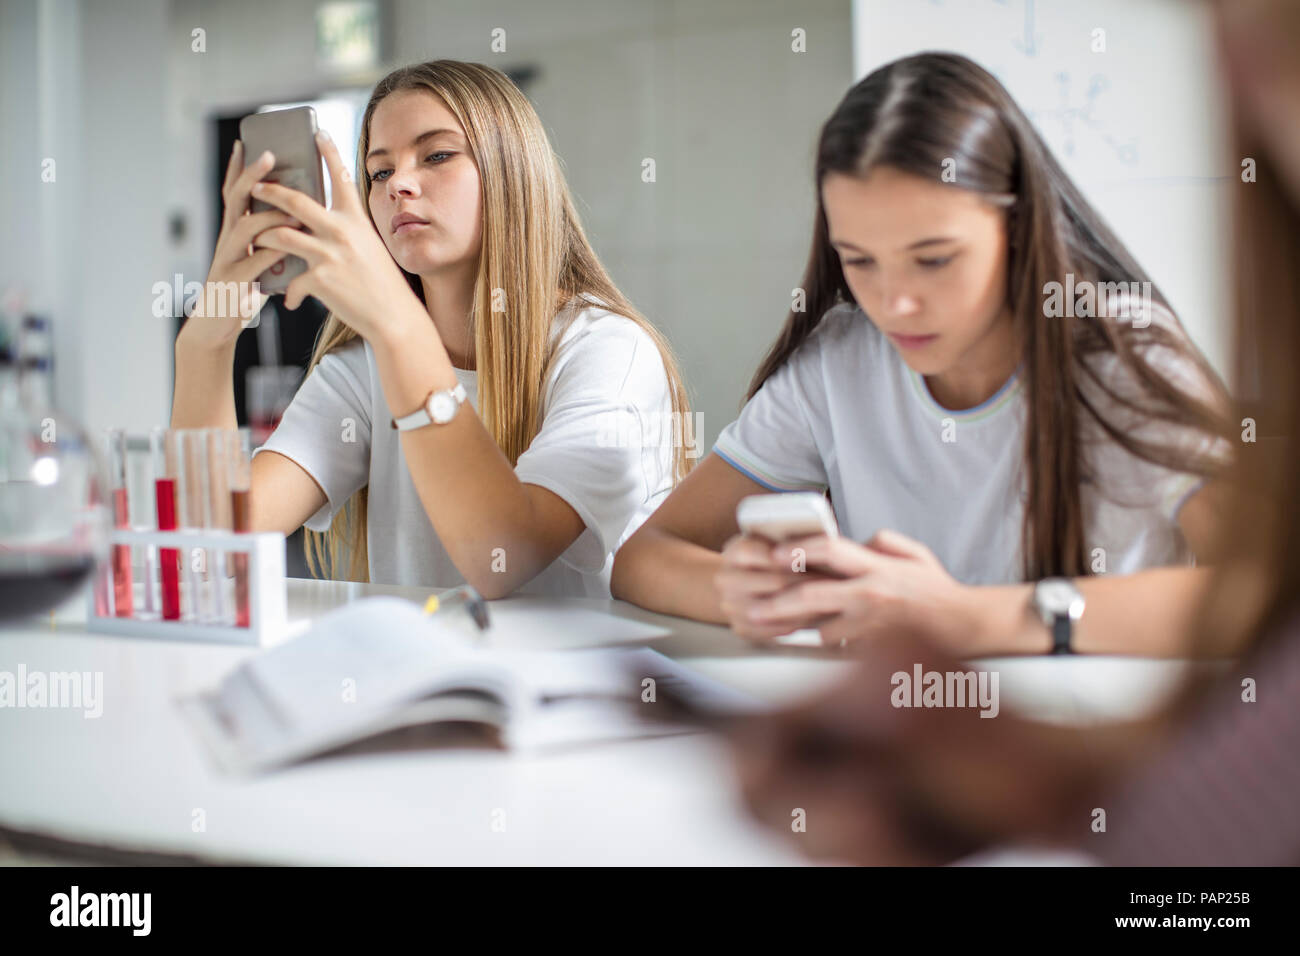 Teenage girls using cell phones in science class Stock Photo